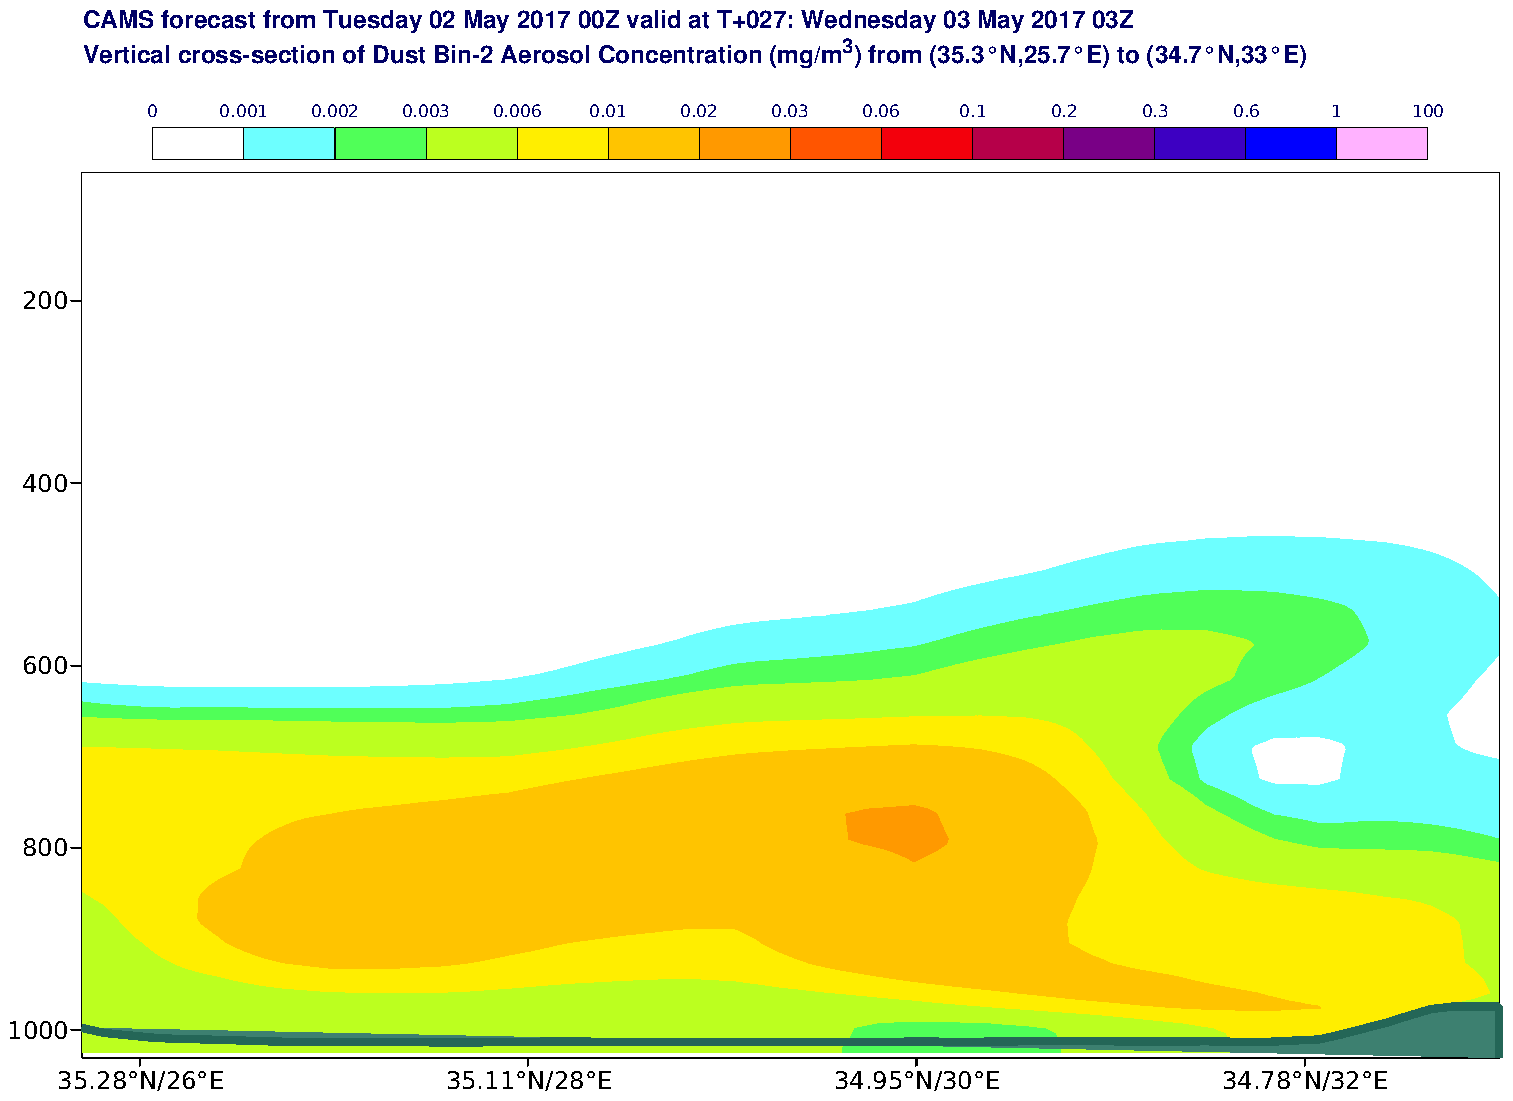 Vertical cross-section of Dust Bin-2 Aerosol Concentration (mg/m3) valid at T27 - 2017-05-03 03:00